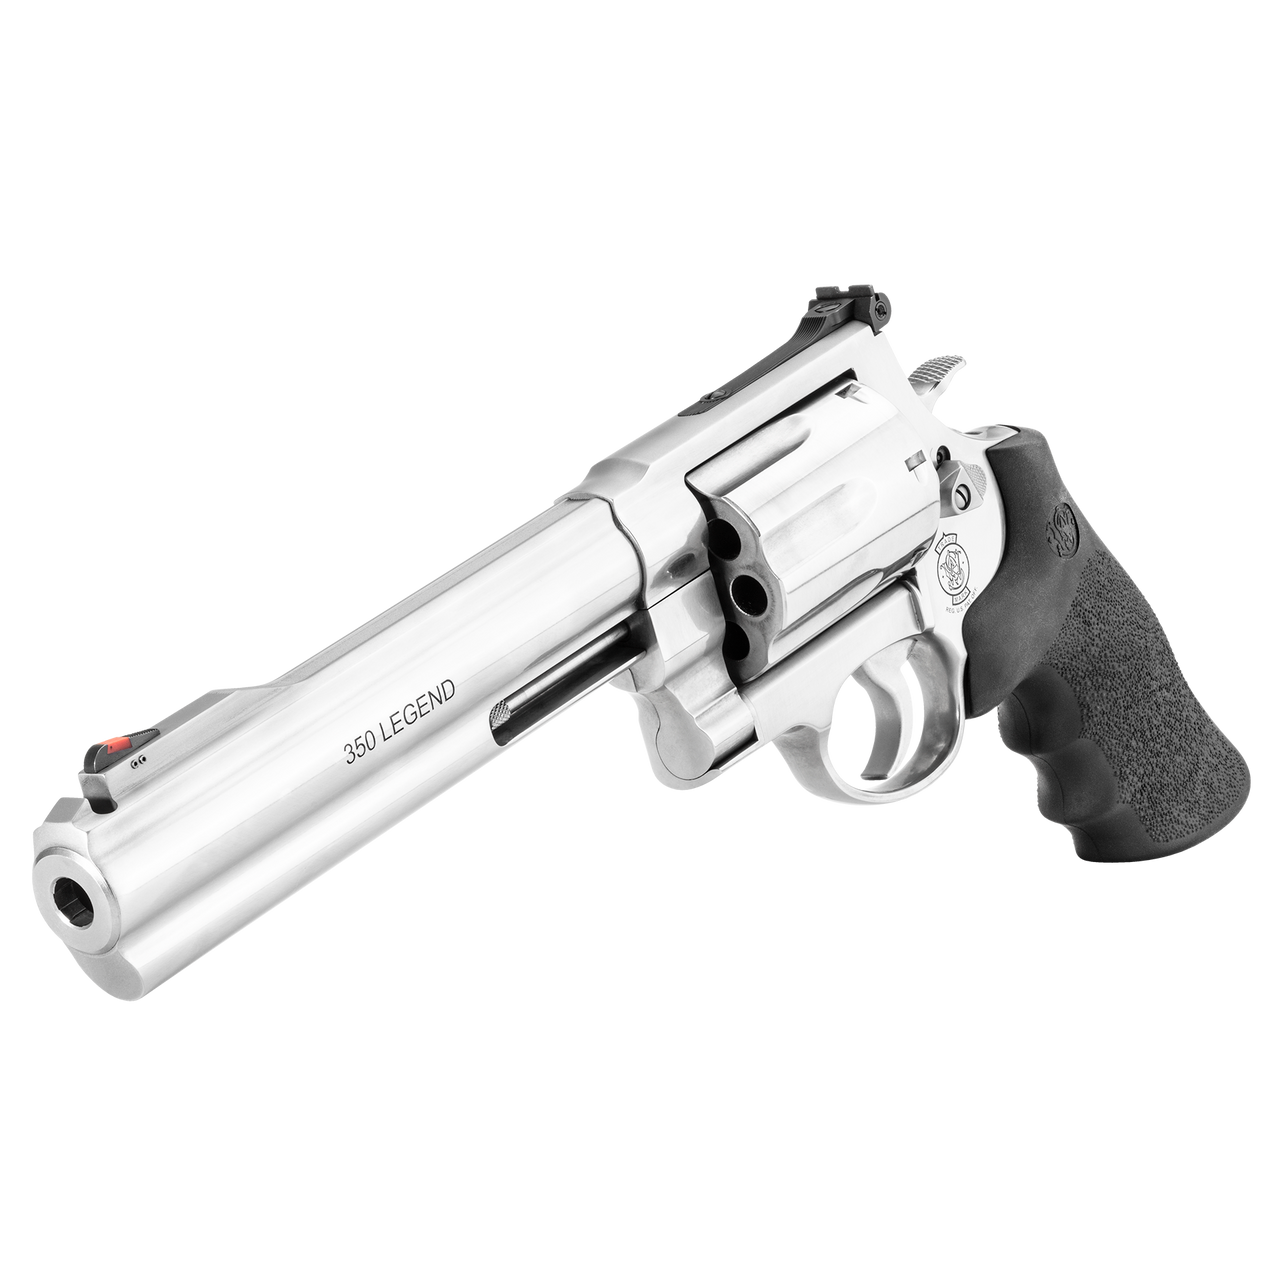 357 magnum smith and wesson revolver